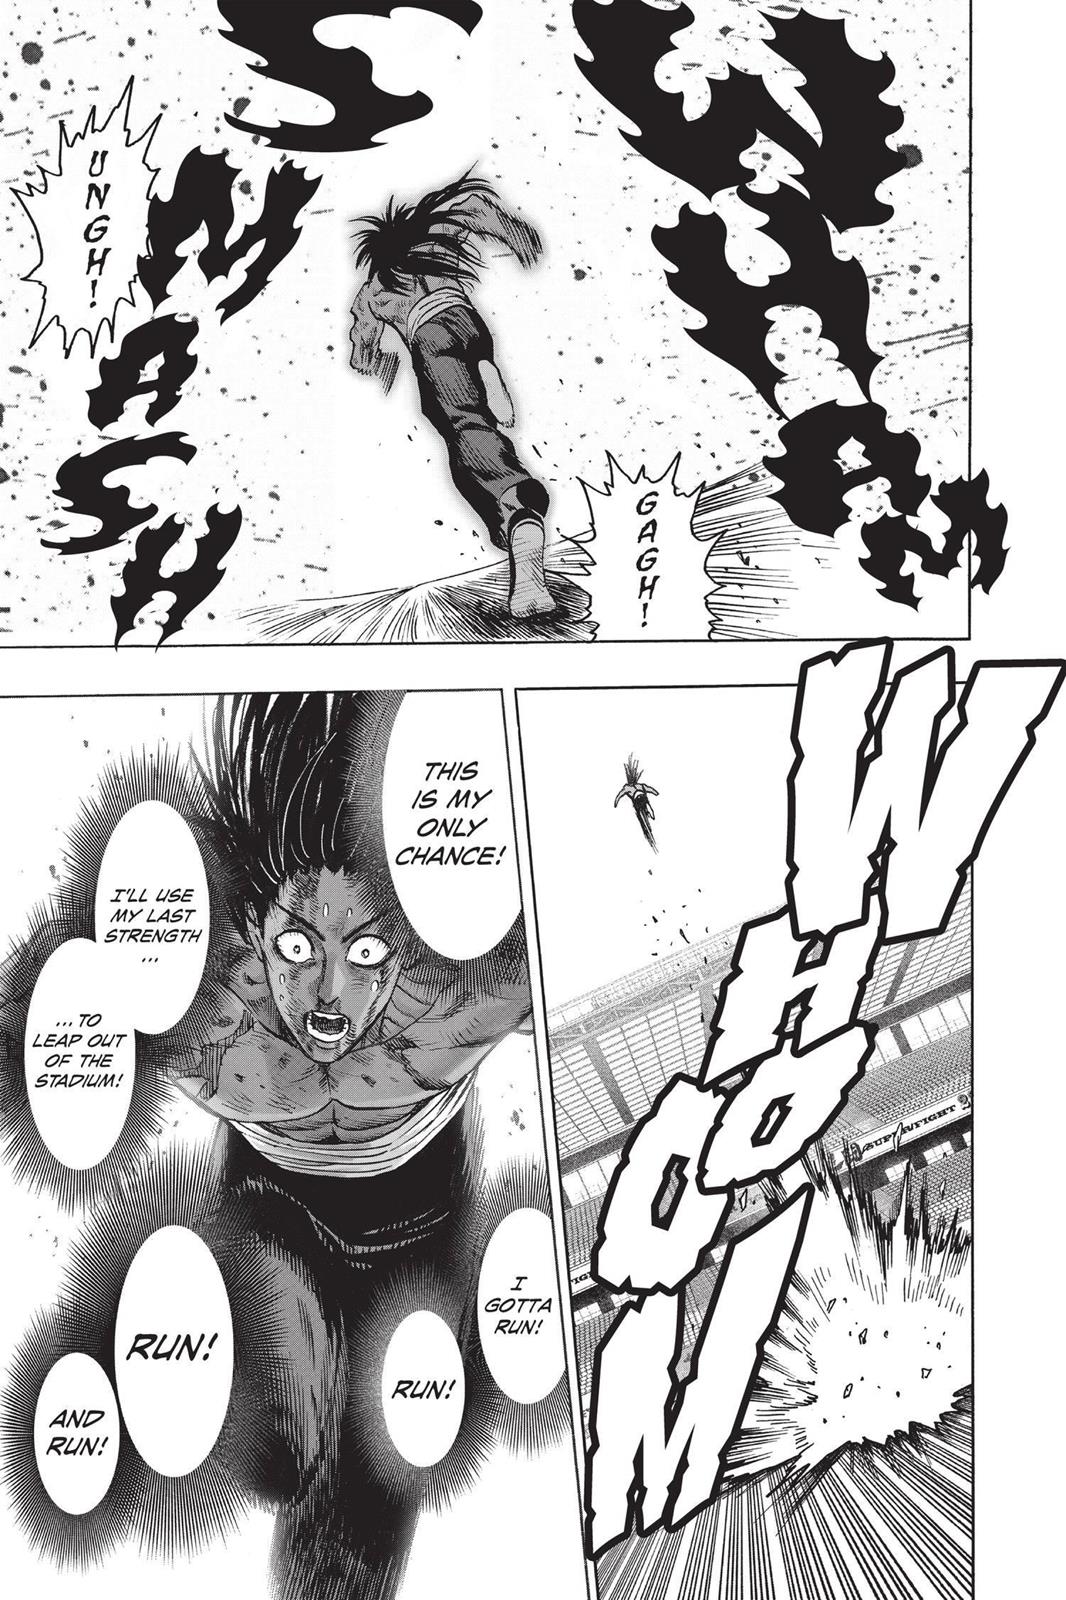 One-Punch Man, Punch 73 image 39